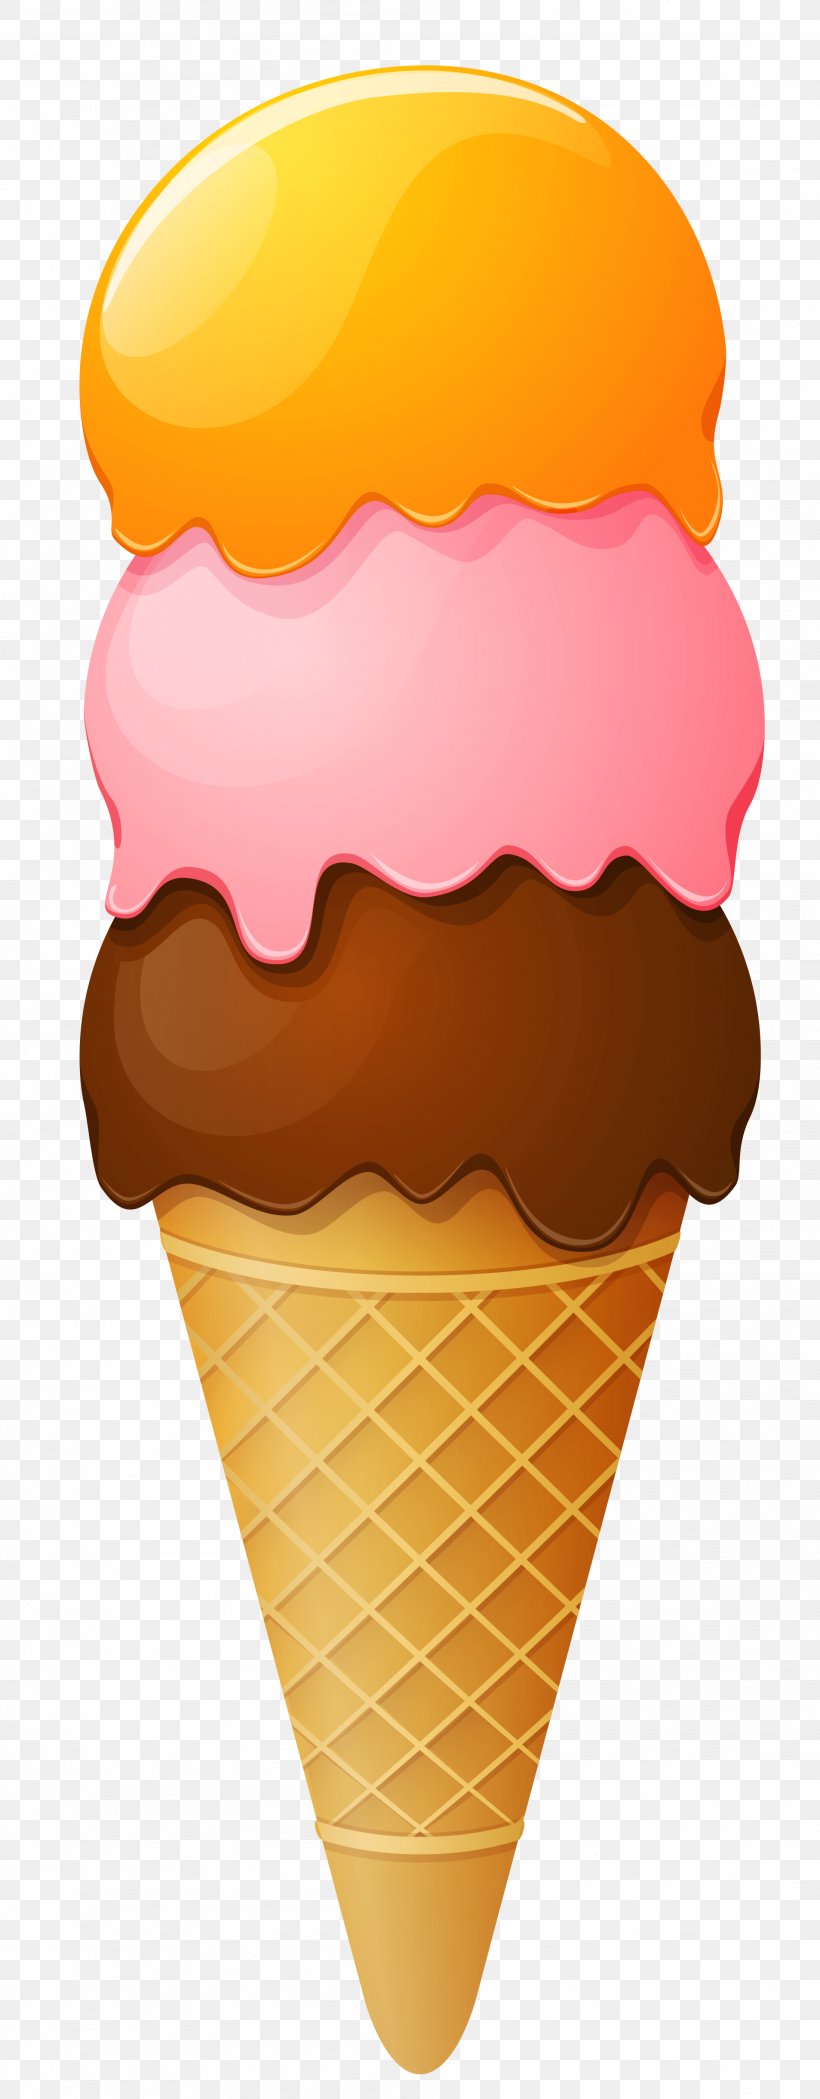 Ice Cream Cones Sundae Clip Art, PNG, 1907x4882px, Ice Cream Cones, Chocolate Ice Cream, Cream, Dairy Product, Dairy Products Download Free